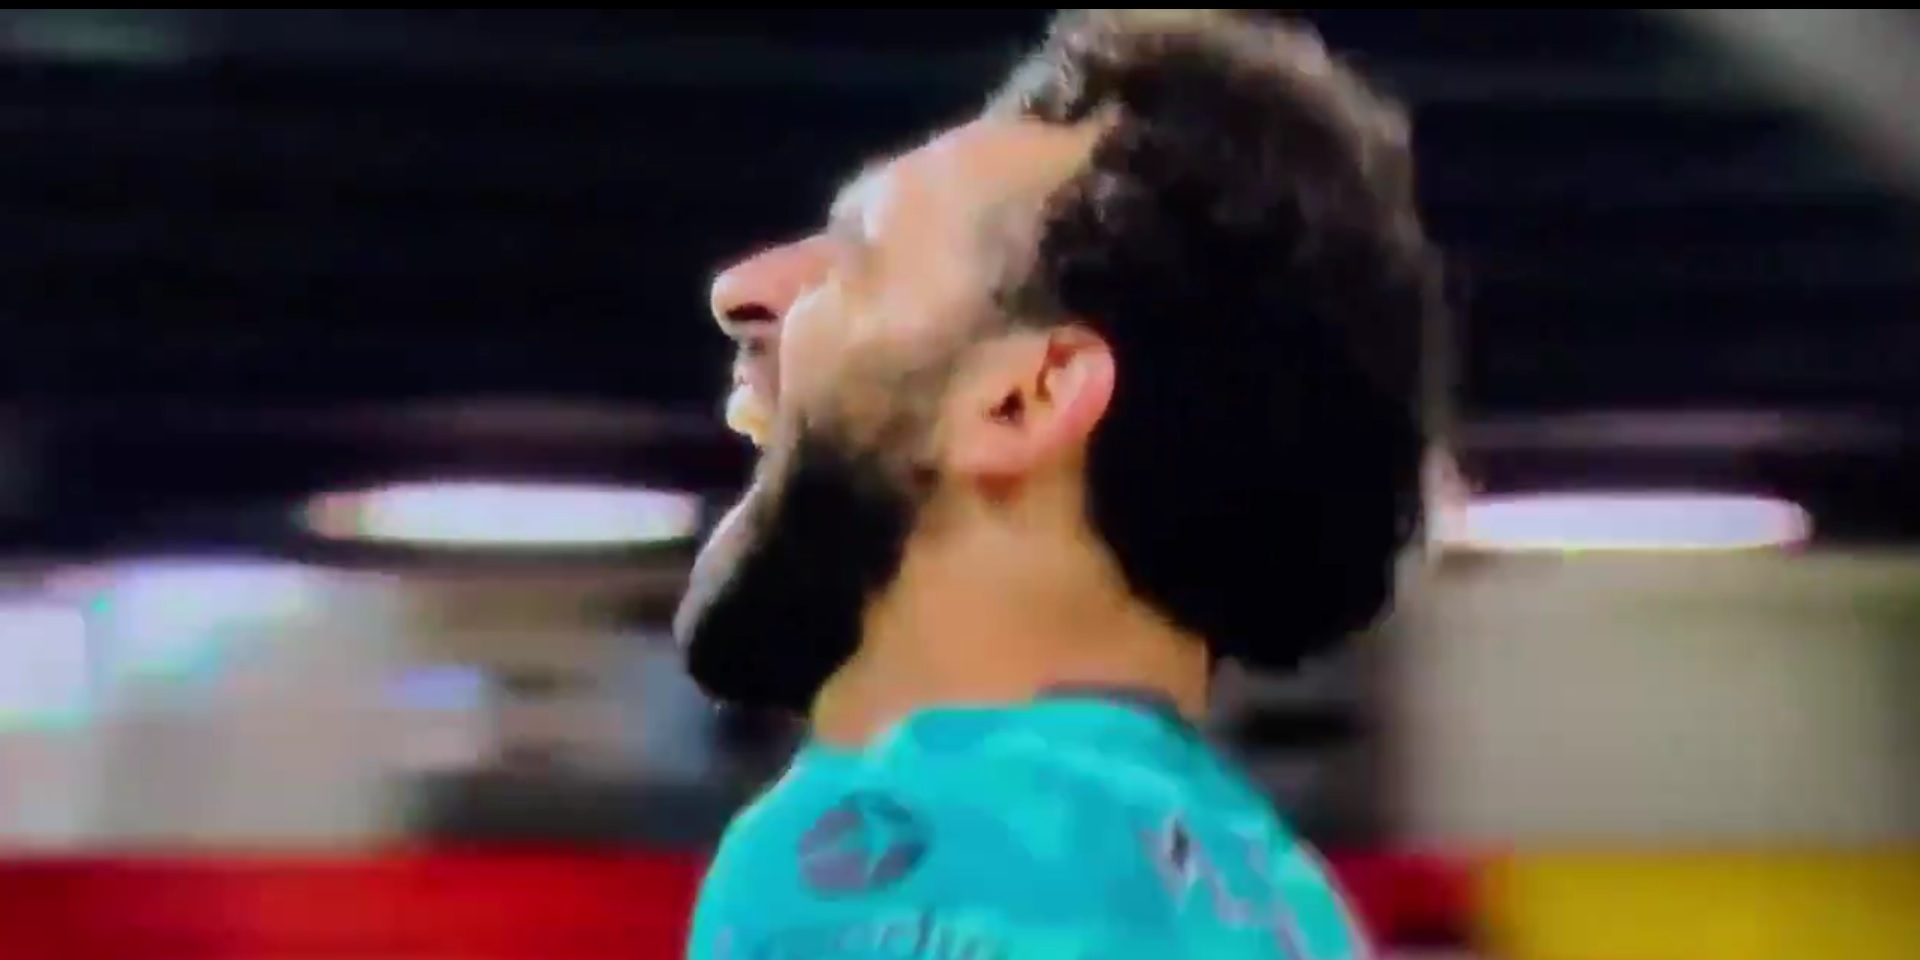 (Video) Mo Salah’s passionate celebration as Liverpool win at Old Trafford is glorious